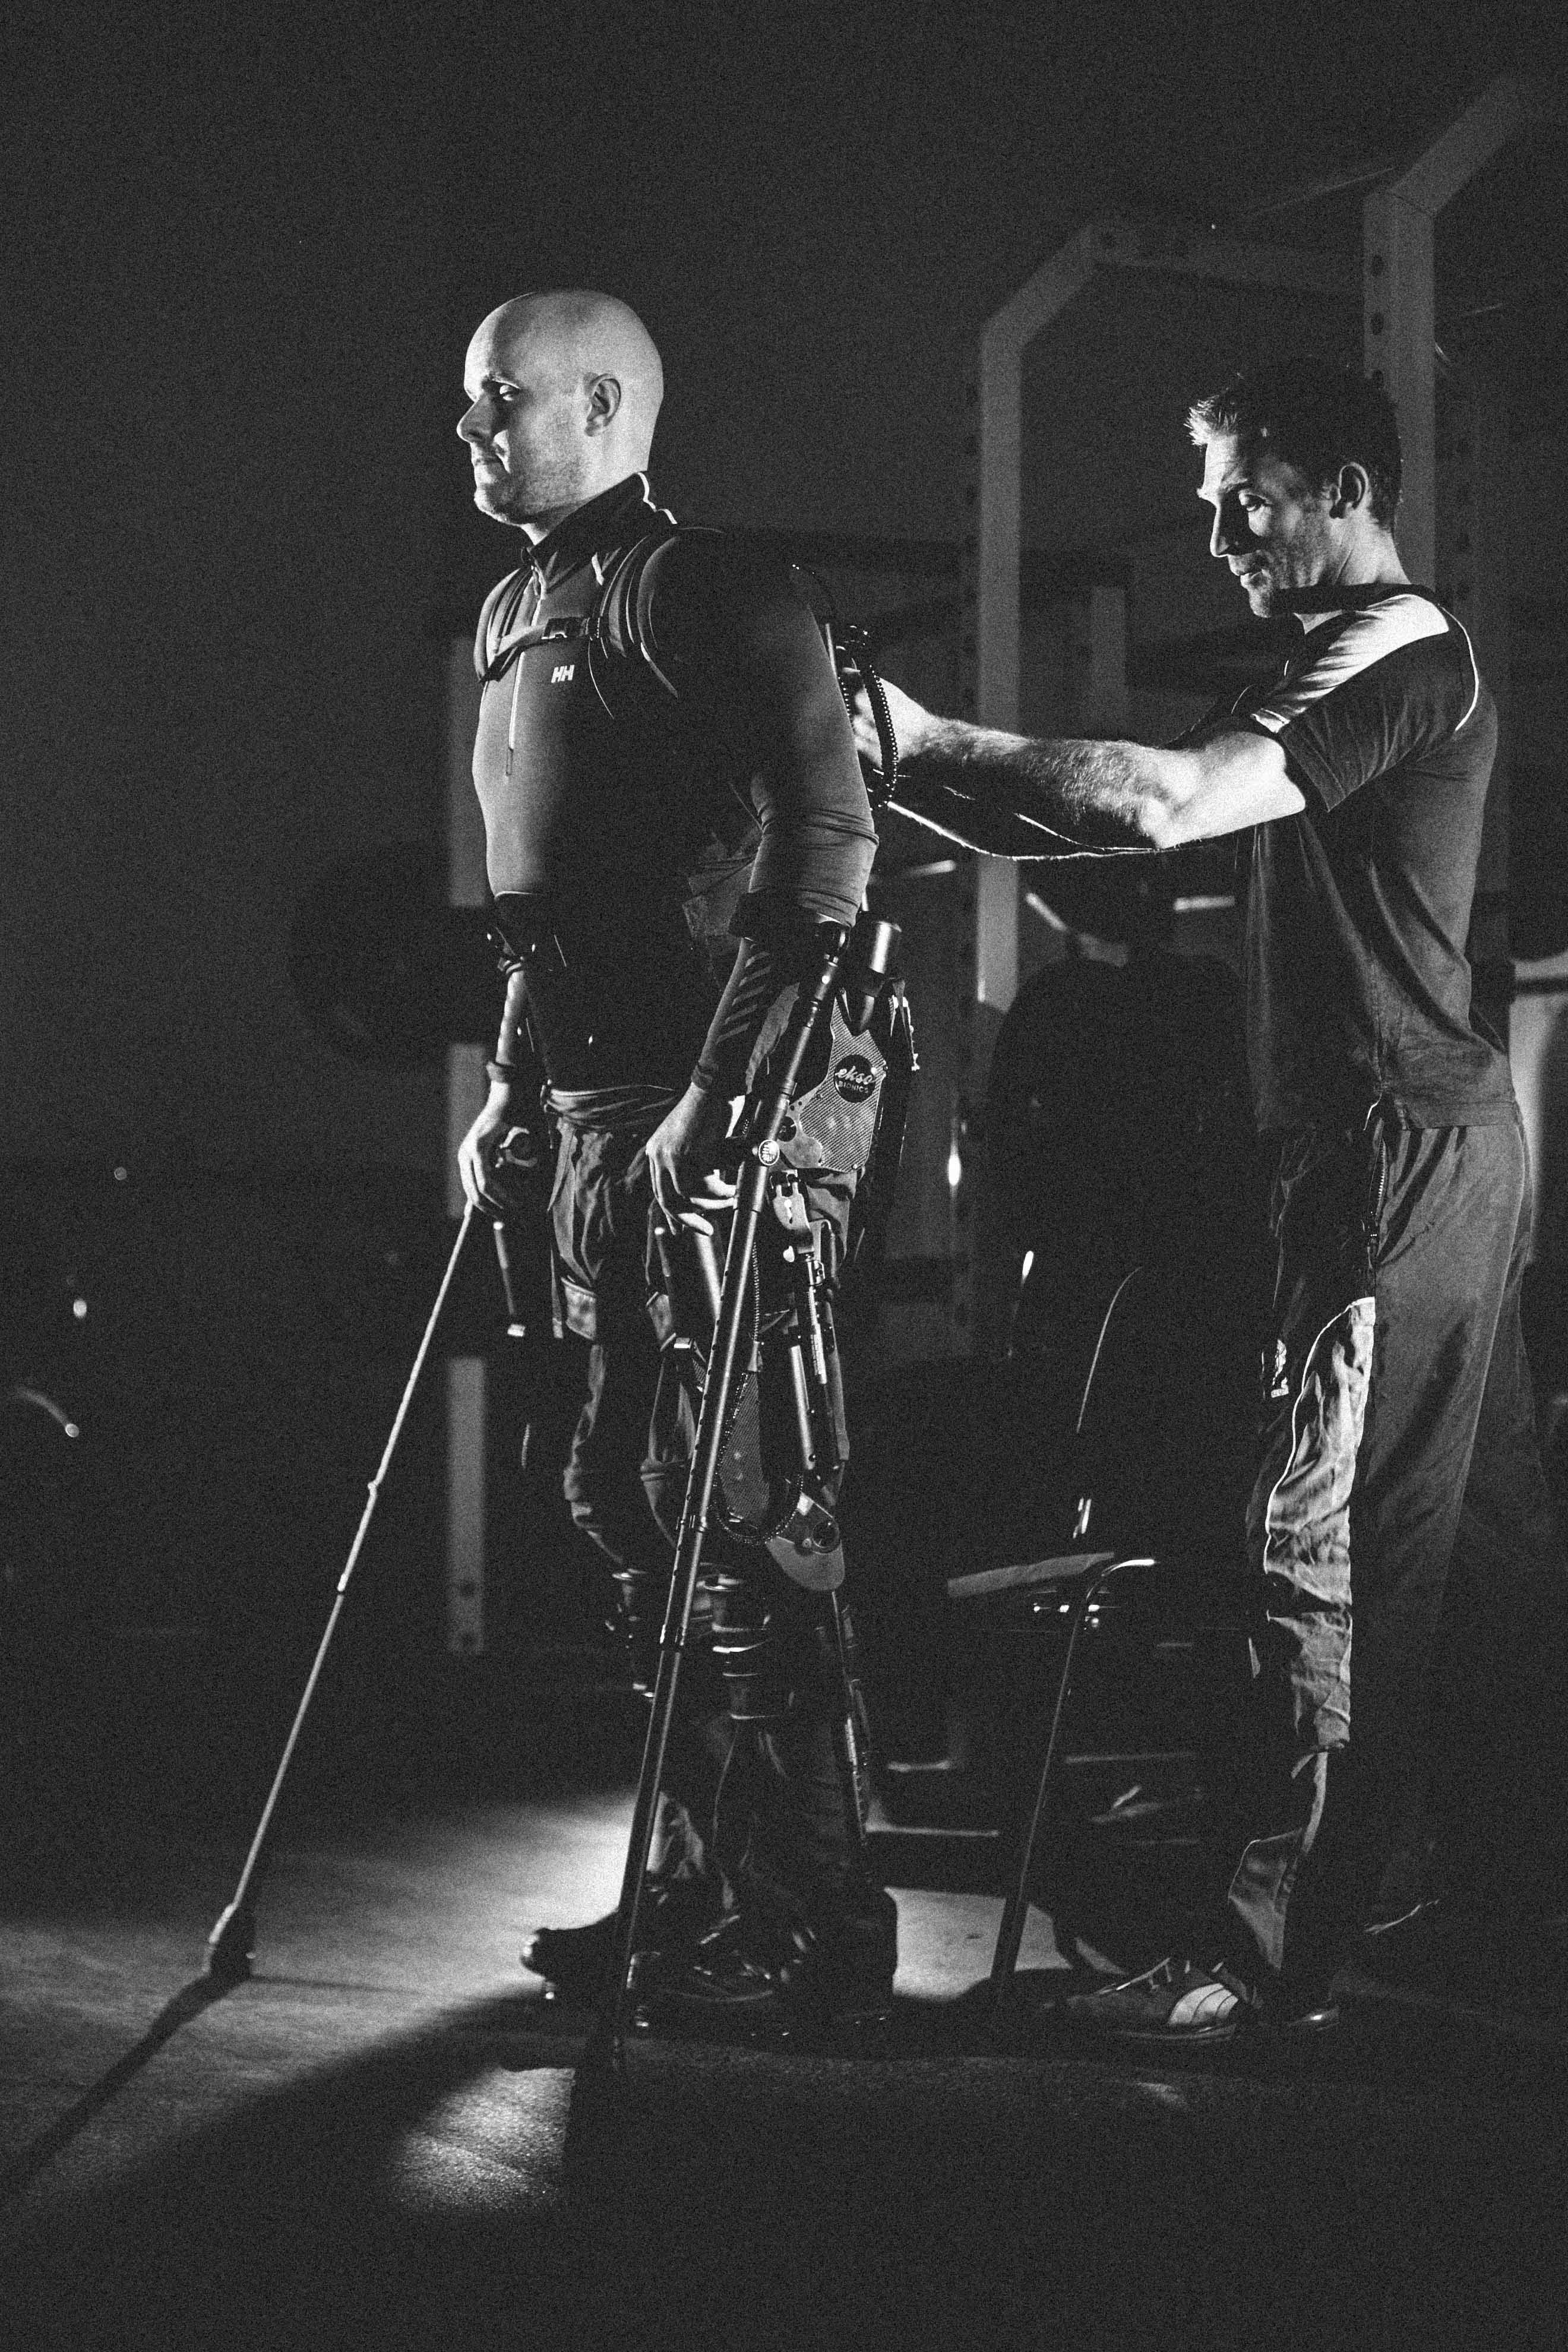 ALL IMAGES COPYRIGHT MARK POLLOCK TRUST. An assistant helps Mark Pollock stand while he is in his Ekso Bionics robotic exoskeleton.